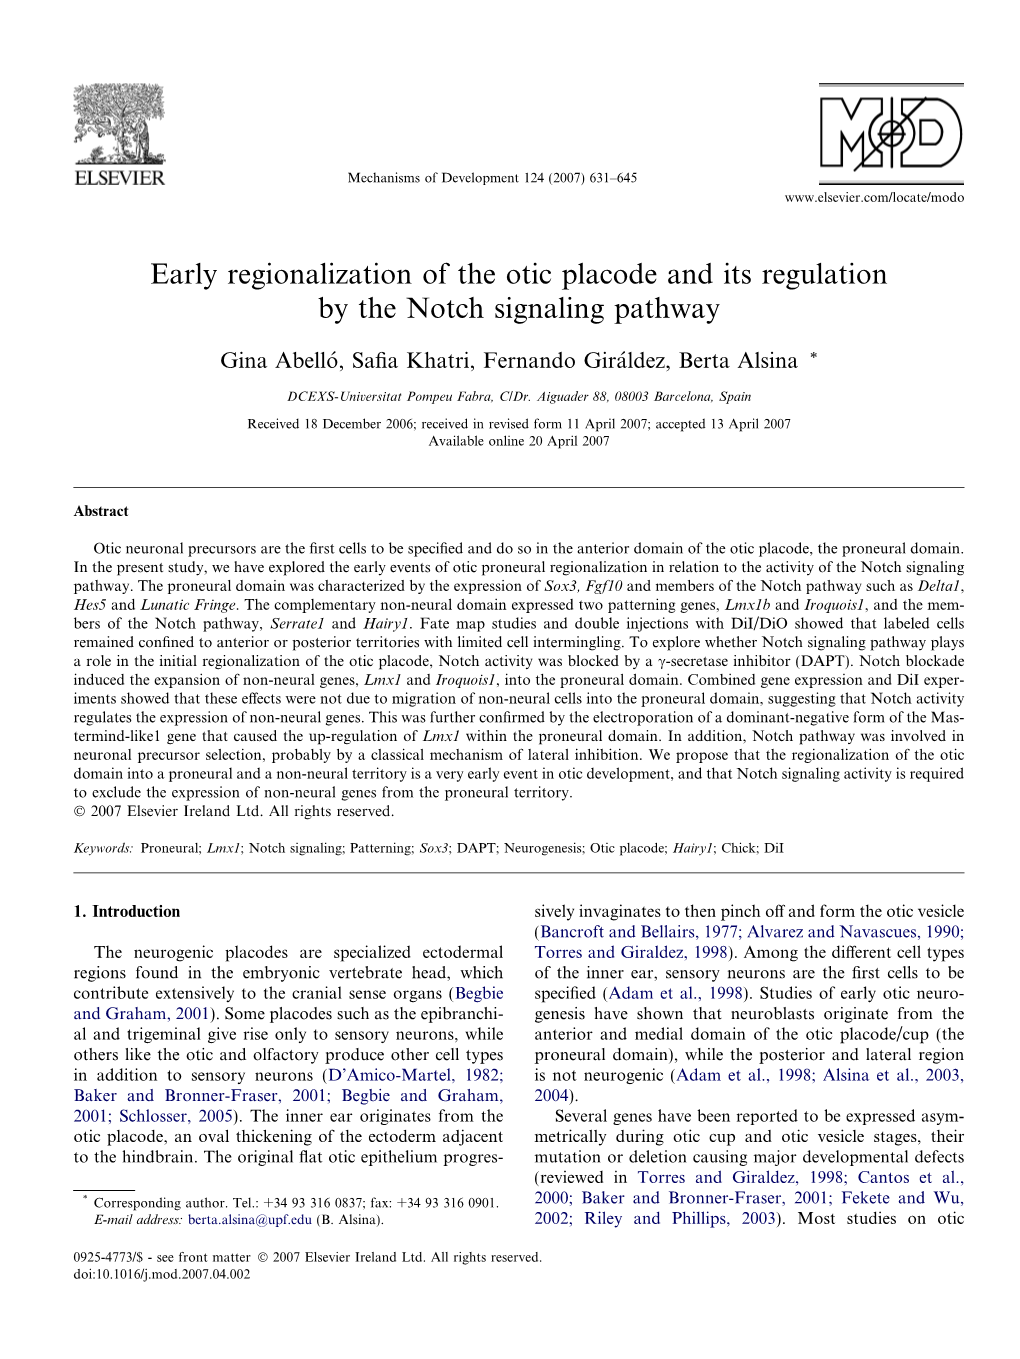 Early Regionalization of the Otic Placode and Its Regulation by the Notch Signaling Pathway